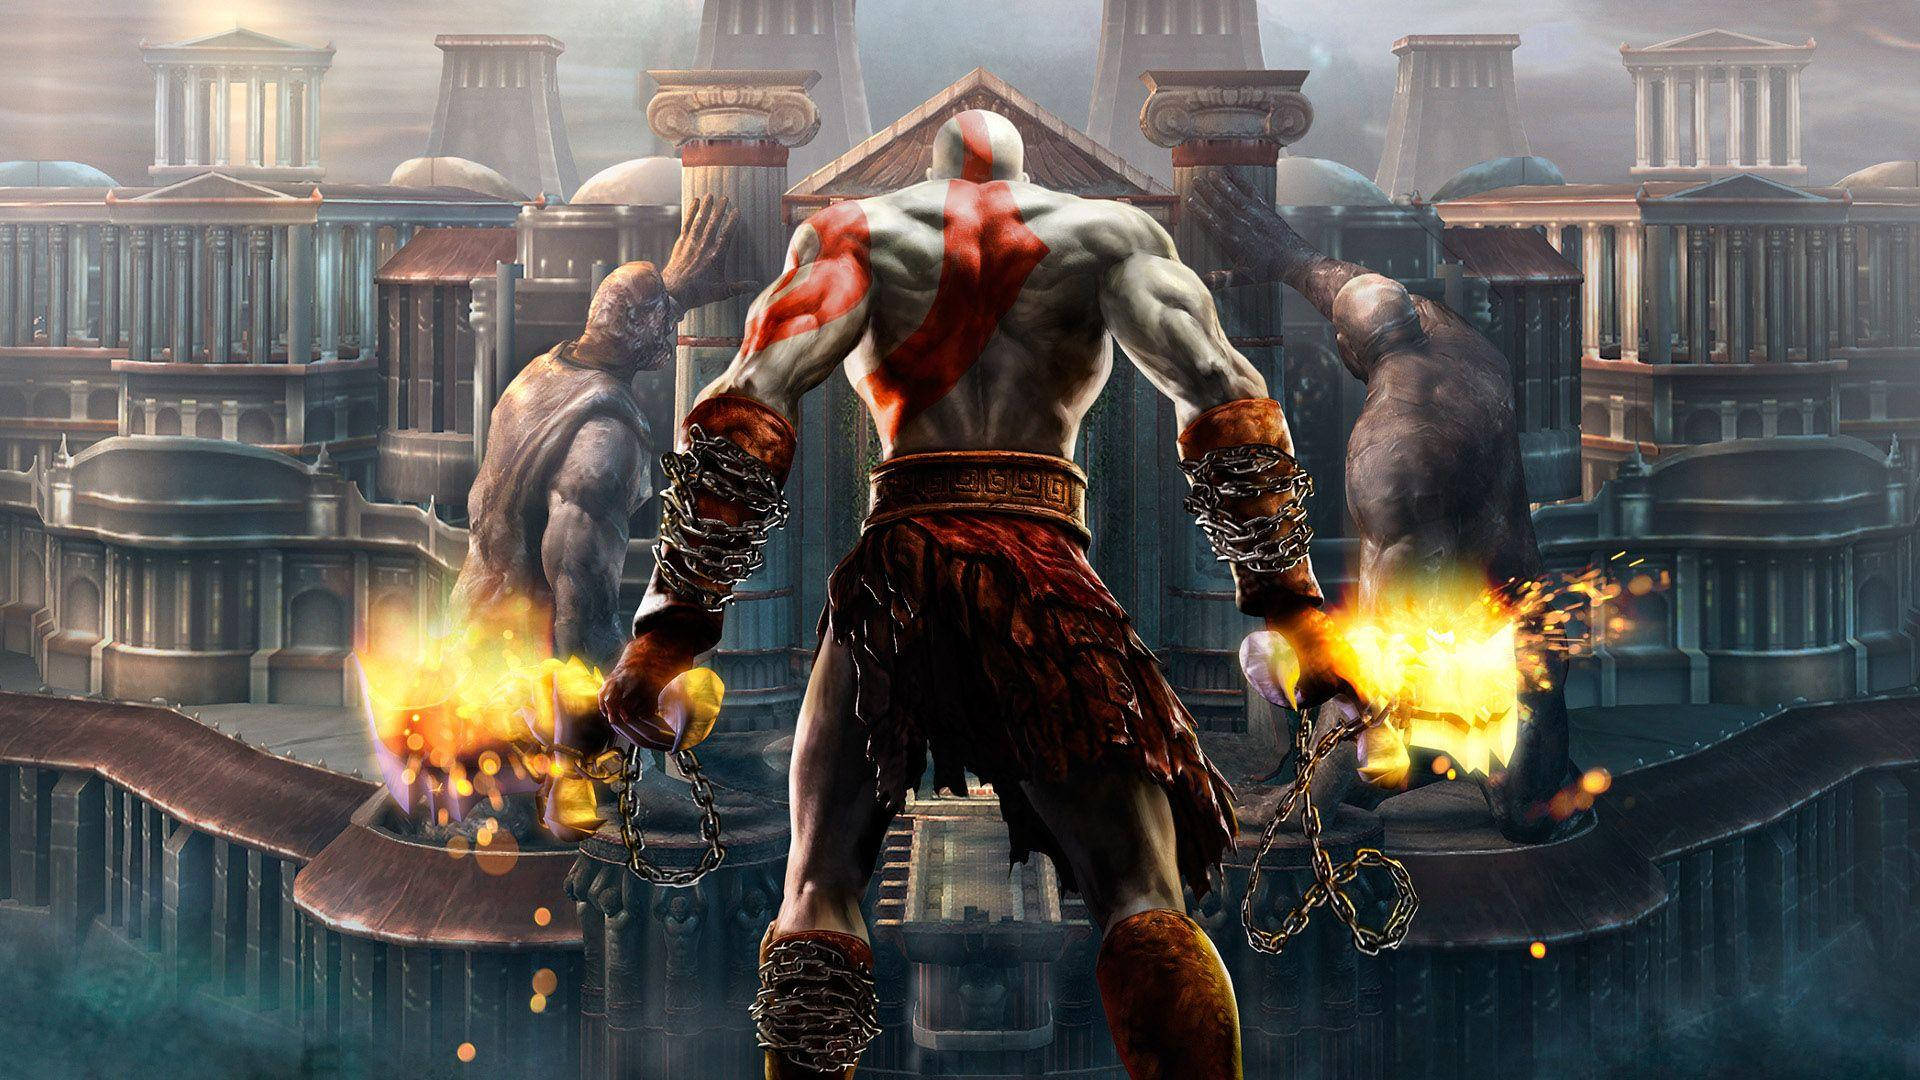 Dynamic 3d Gaming Experience With God Of War Ii Wallpaper